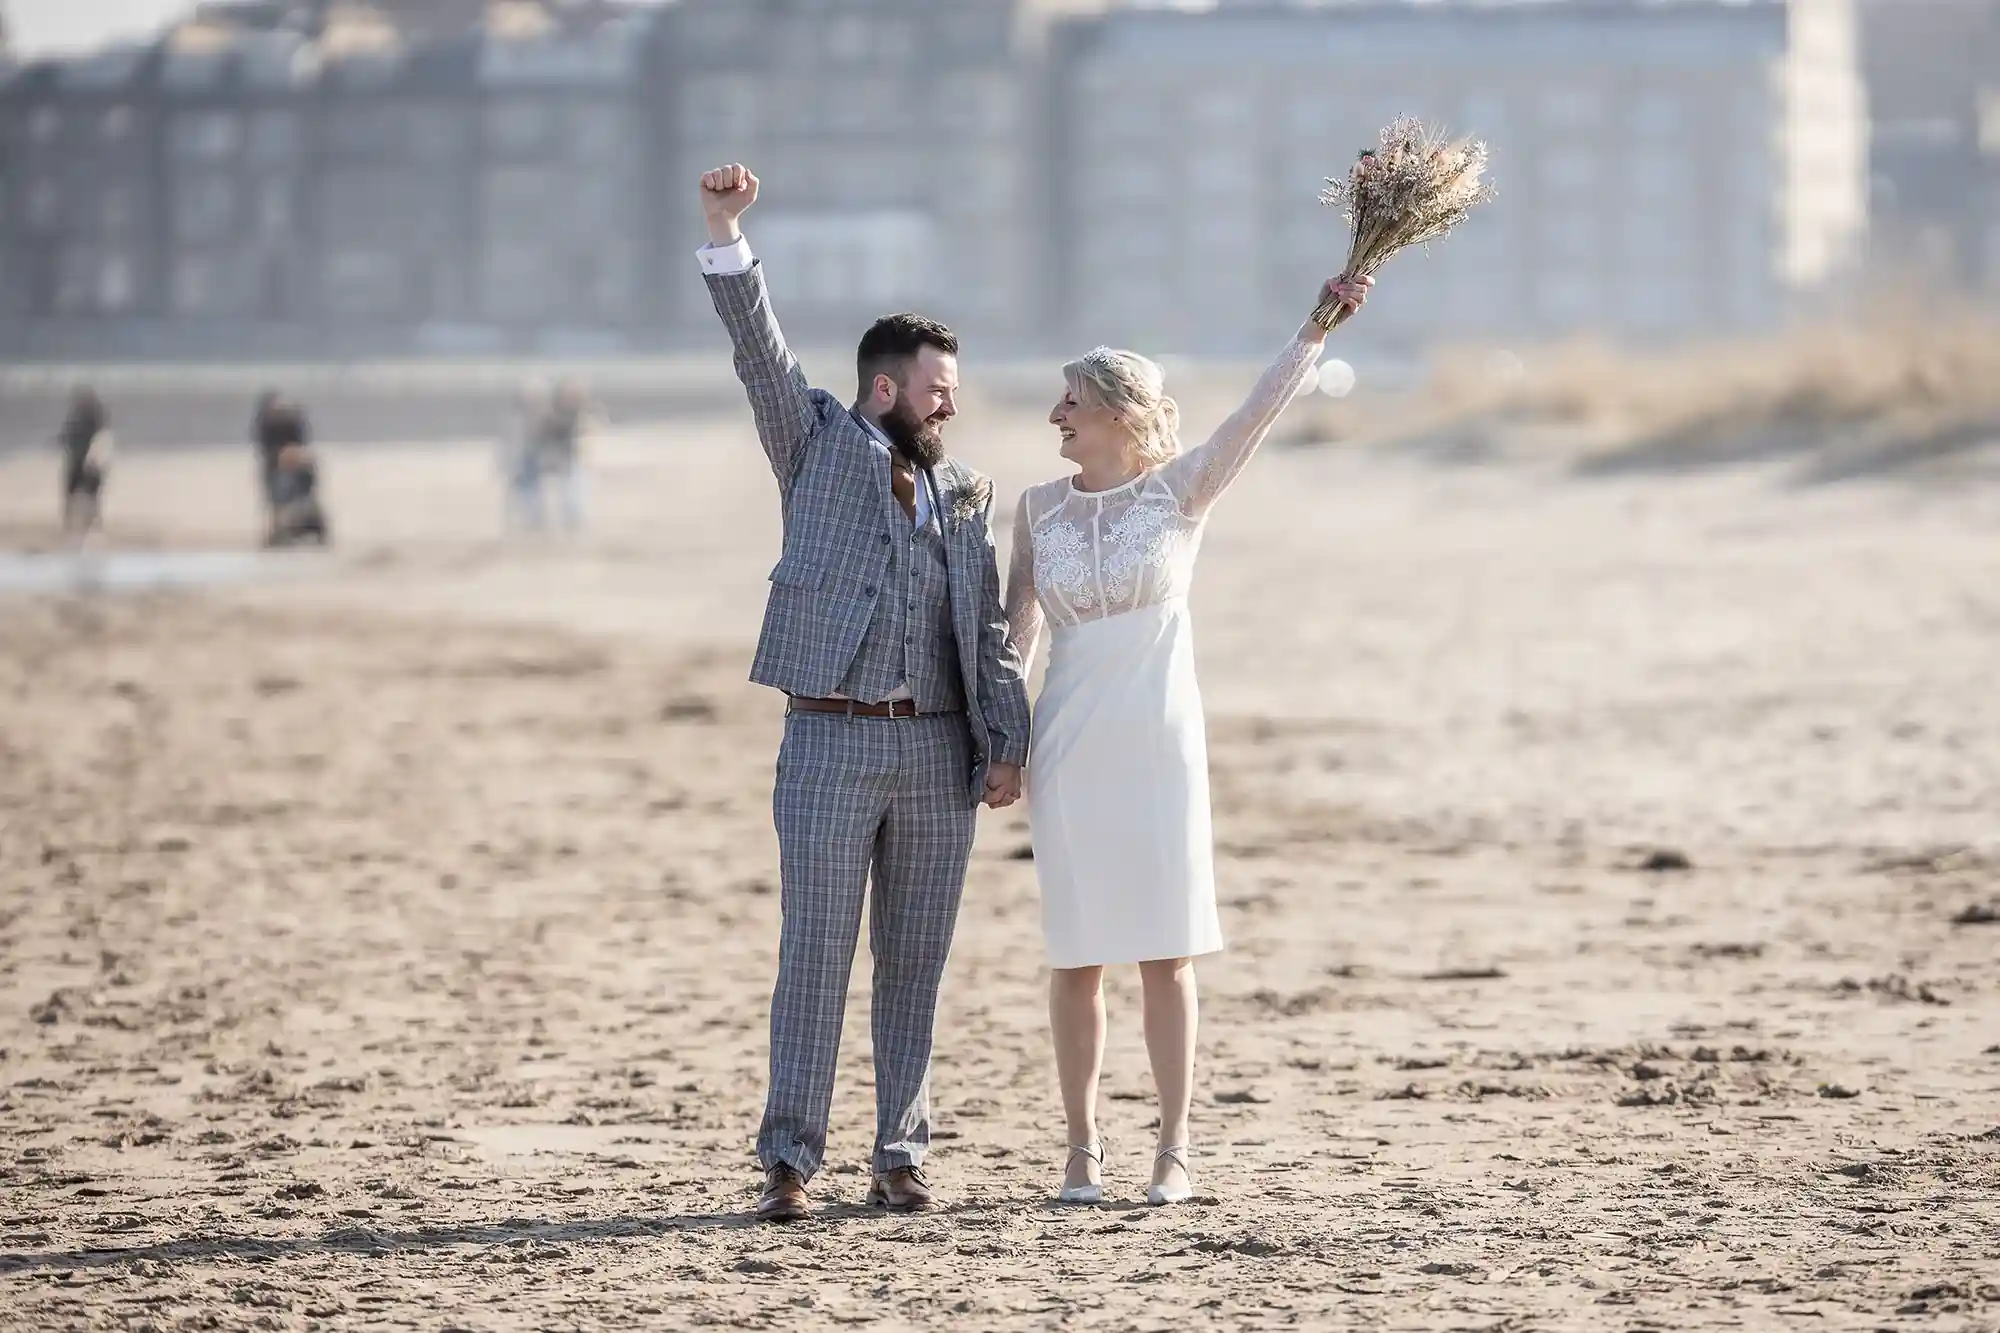 A joyful couple celebrates on a beach, with the woman holding a bouquet aloft and the man fist-pumping the air.